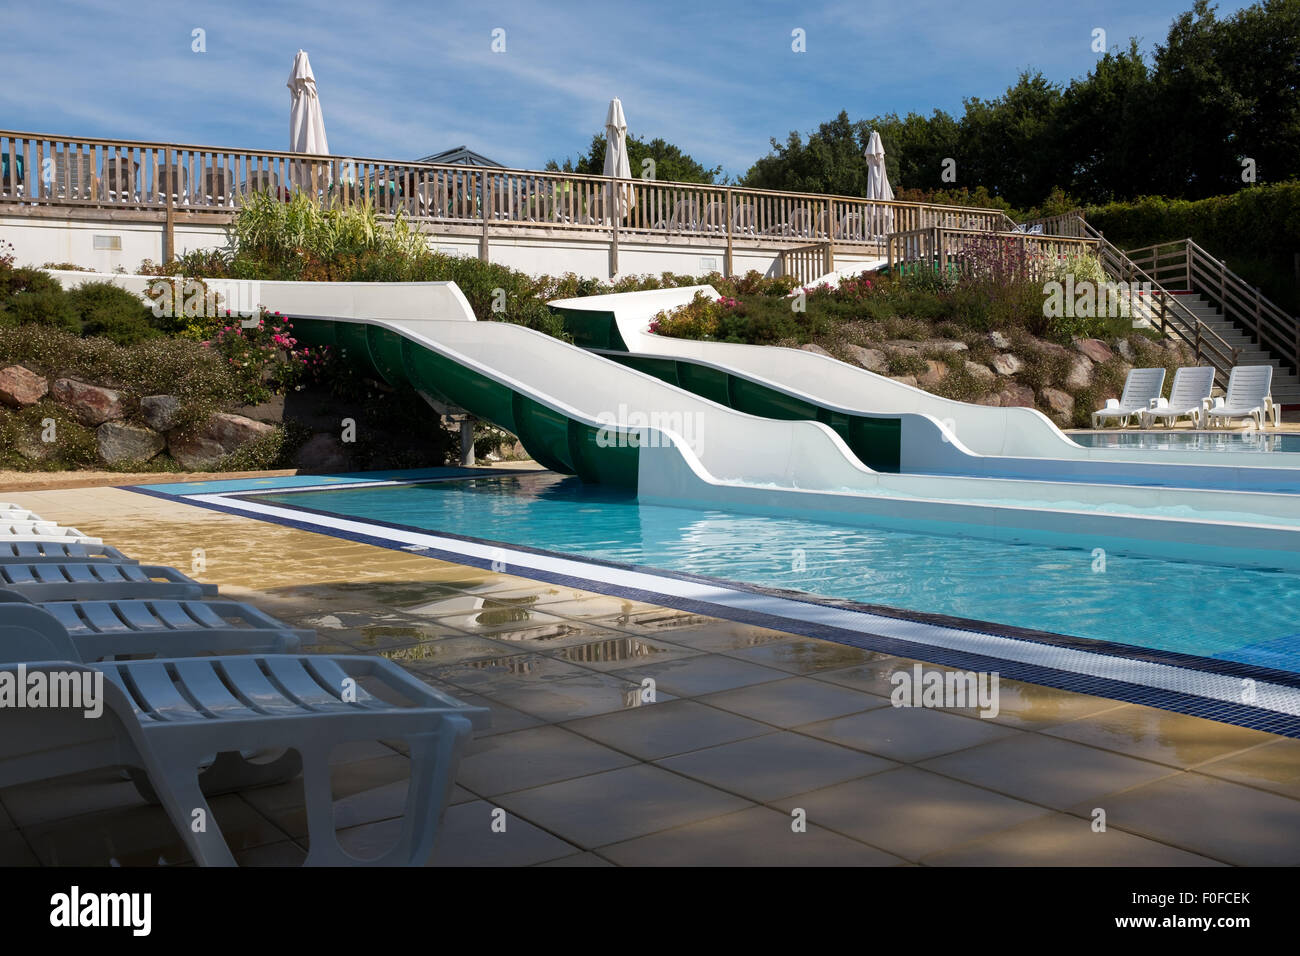 Water slide at a holiday park Stock Photo